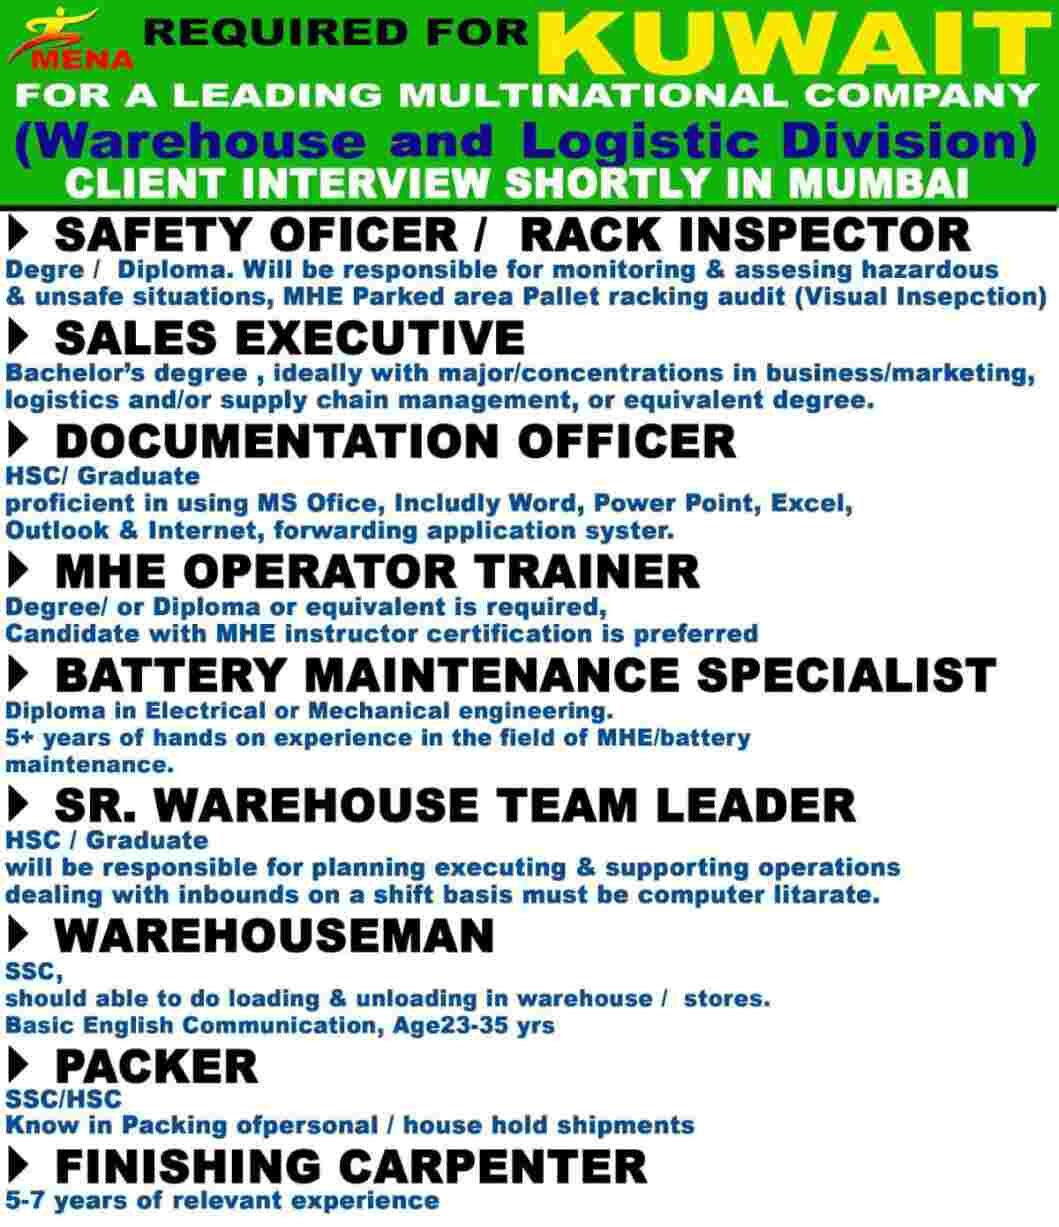 Gulf walk-in Urgent hiring for warehouse & logistic division - Kuwait